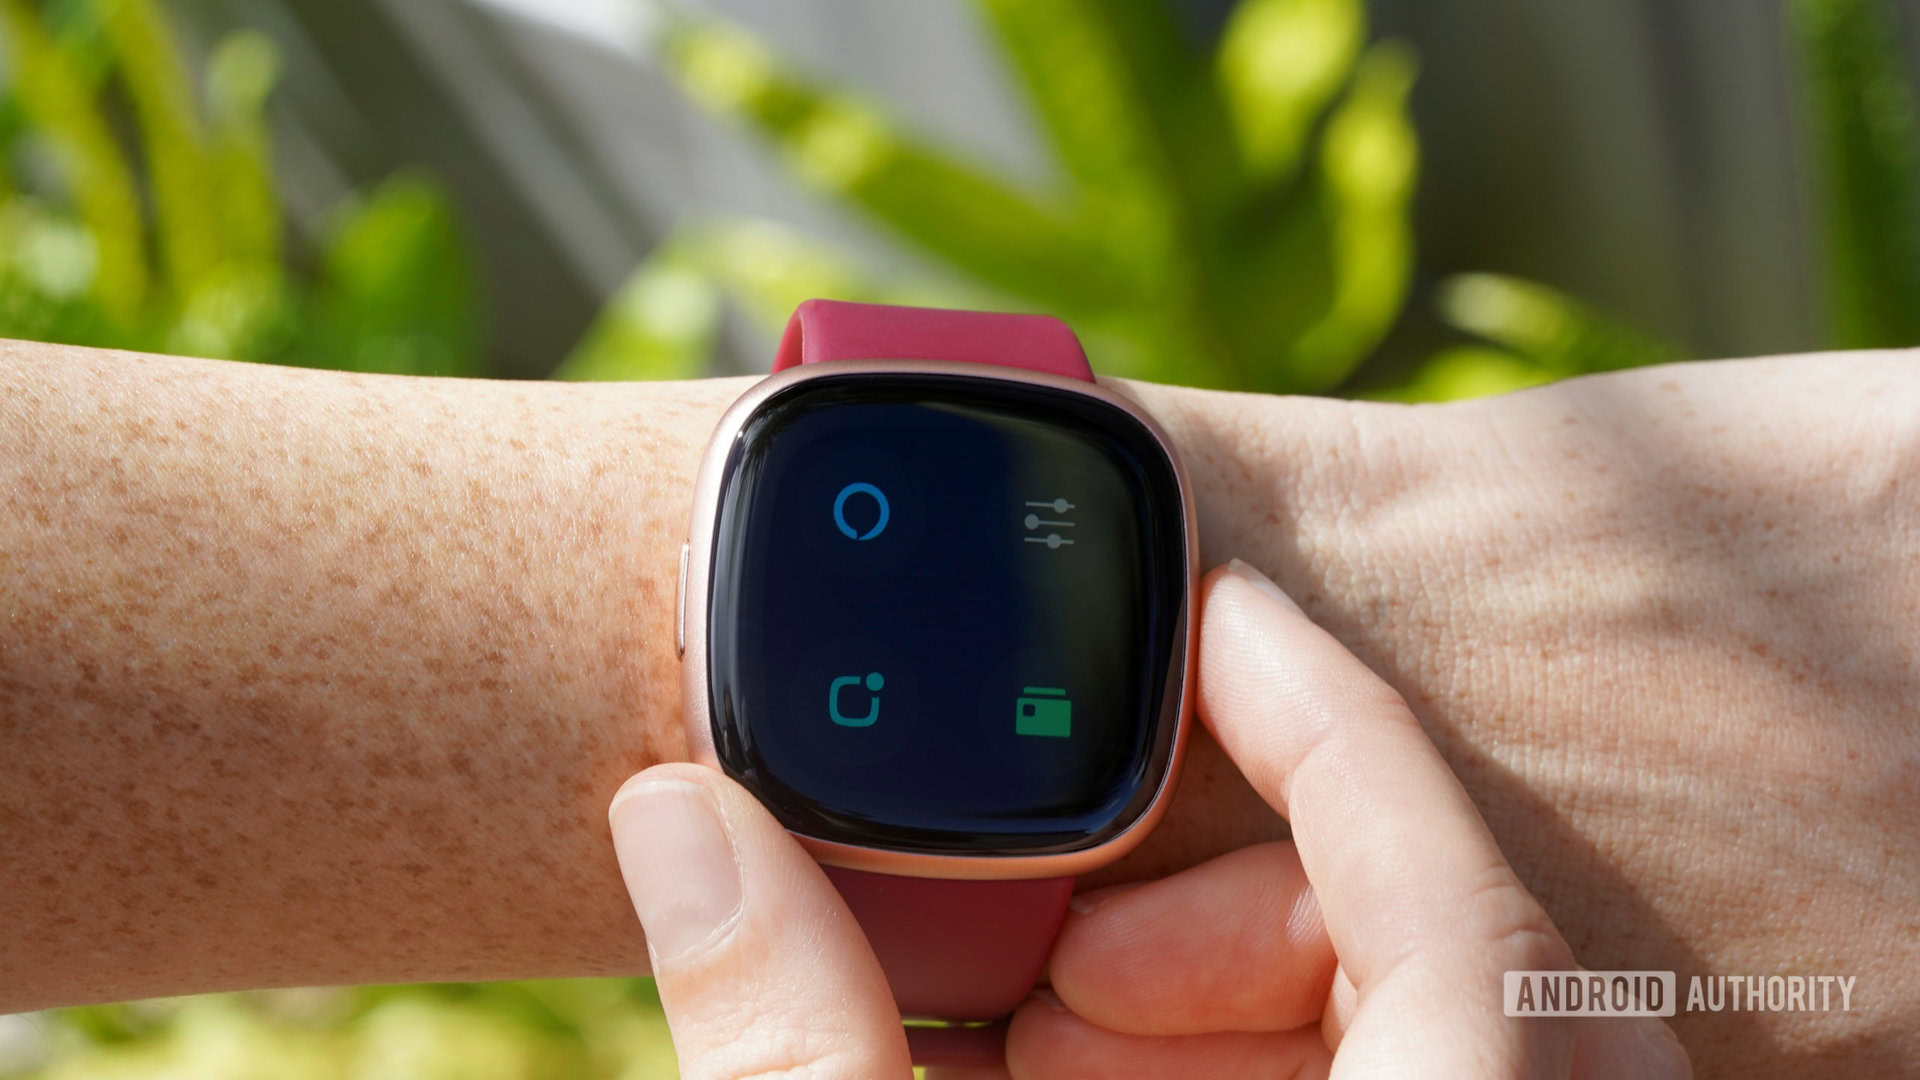 Fitbit Versa 4 Review 2022: A Basic Smartwatch With Long-Lasting Battery